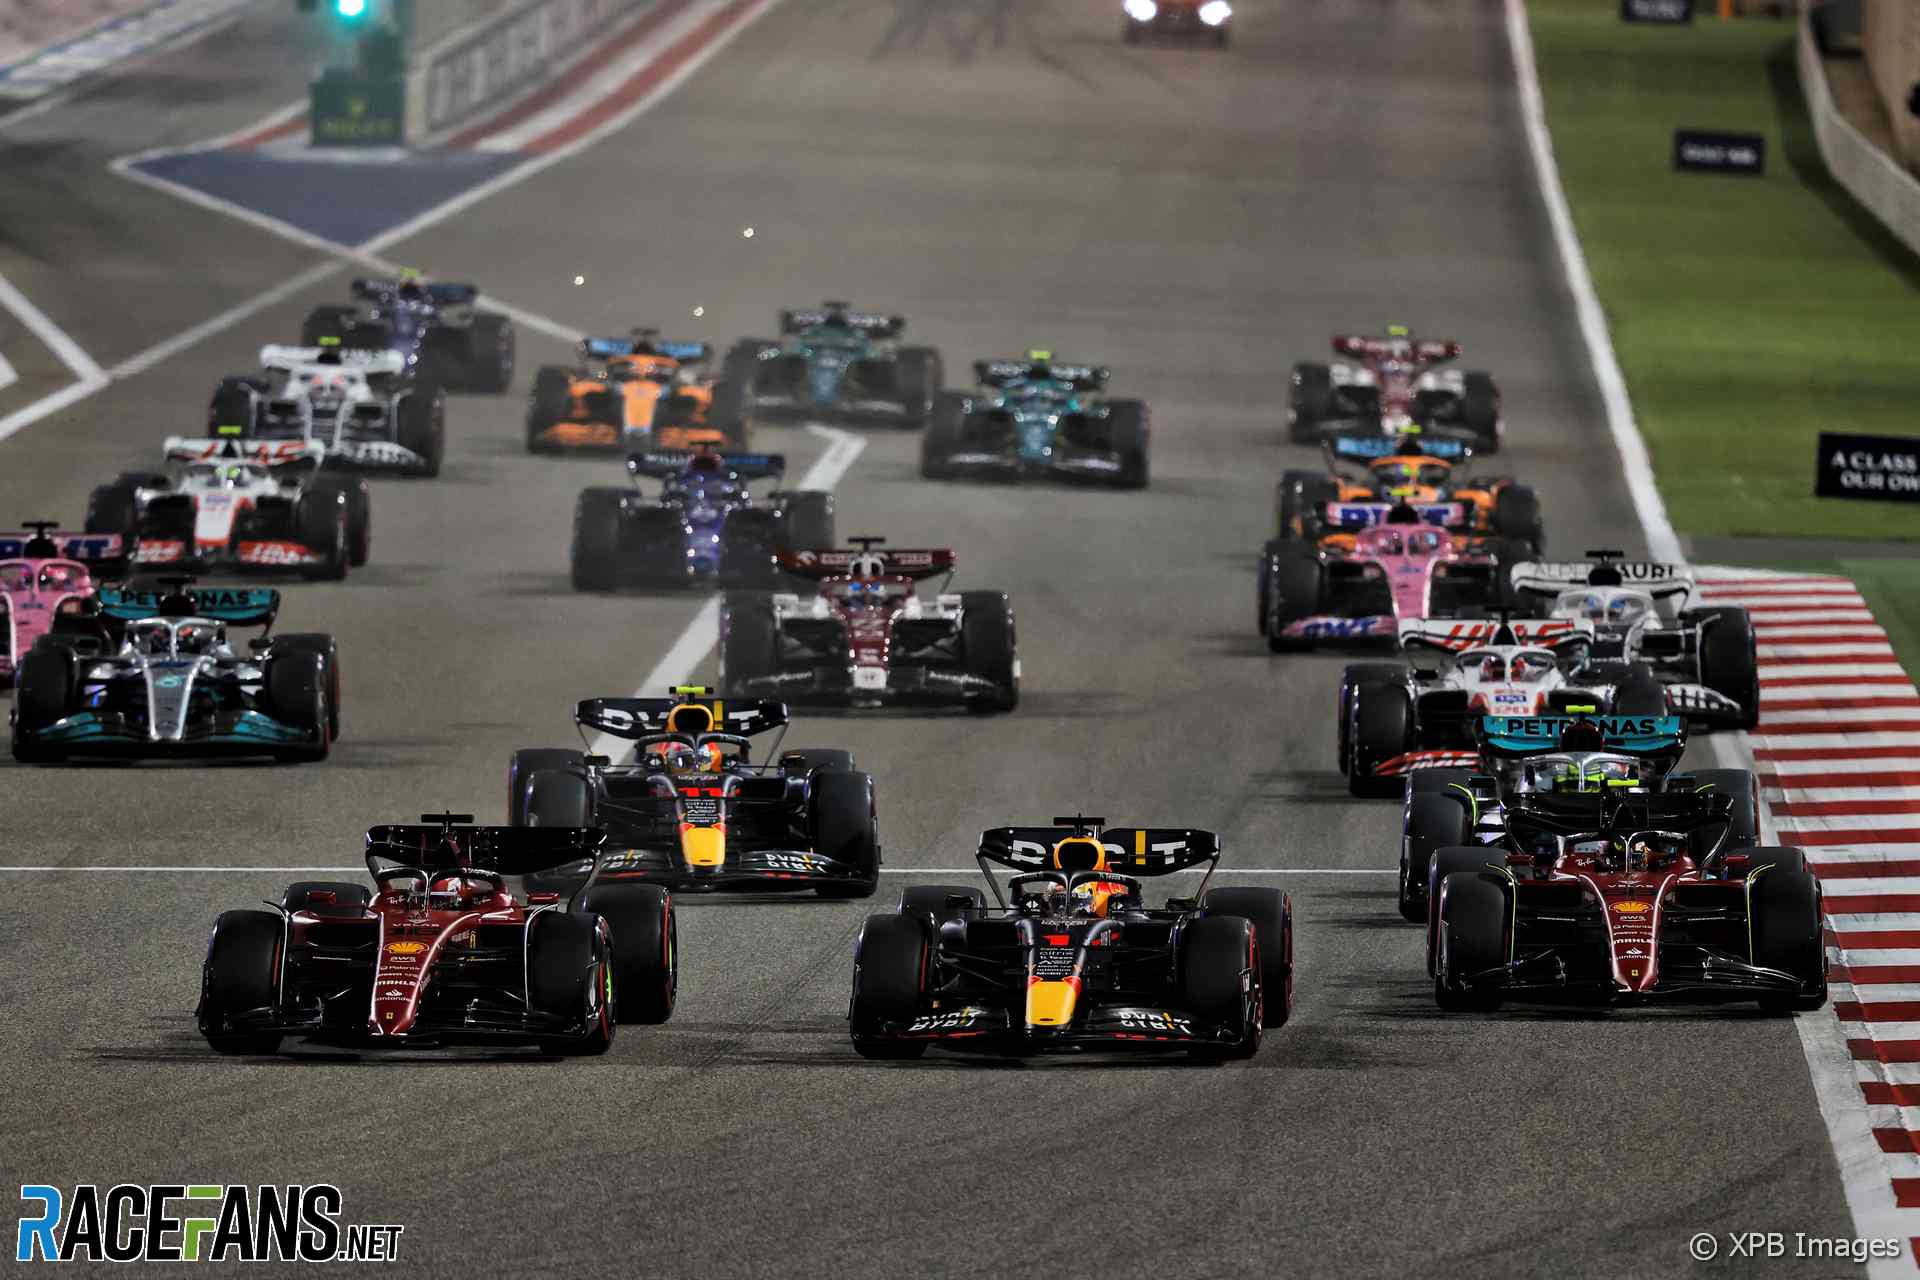 The 2022 Bahrain Grand Prix was held at Bahrain International Circuit and won by Charles Leclerc